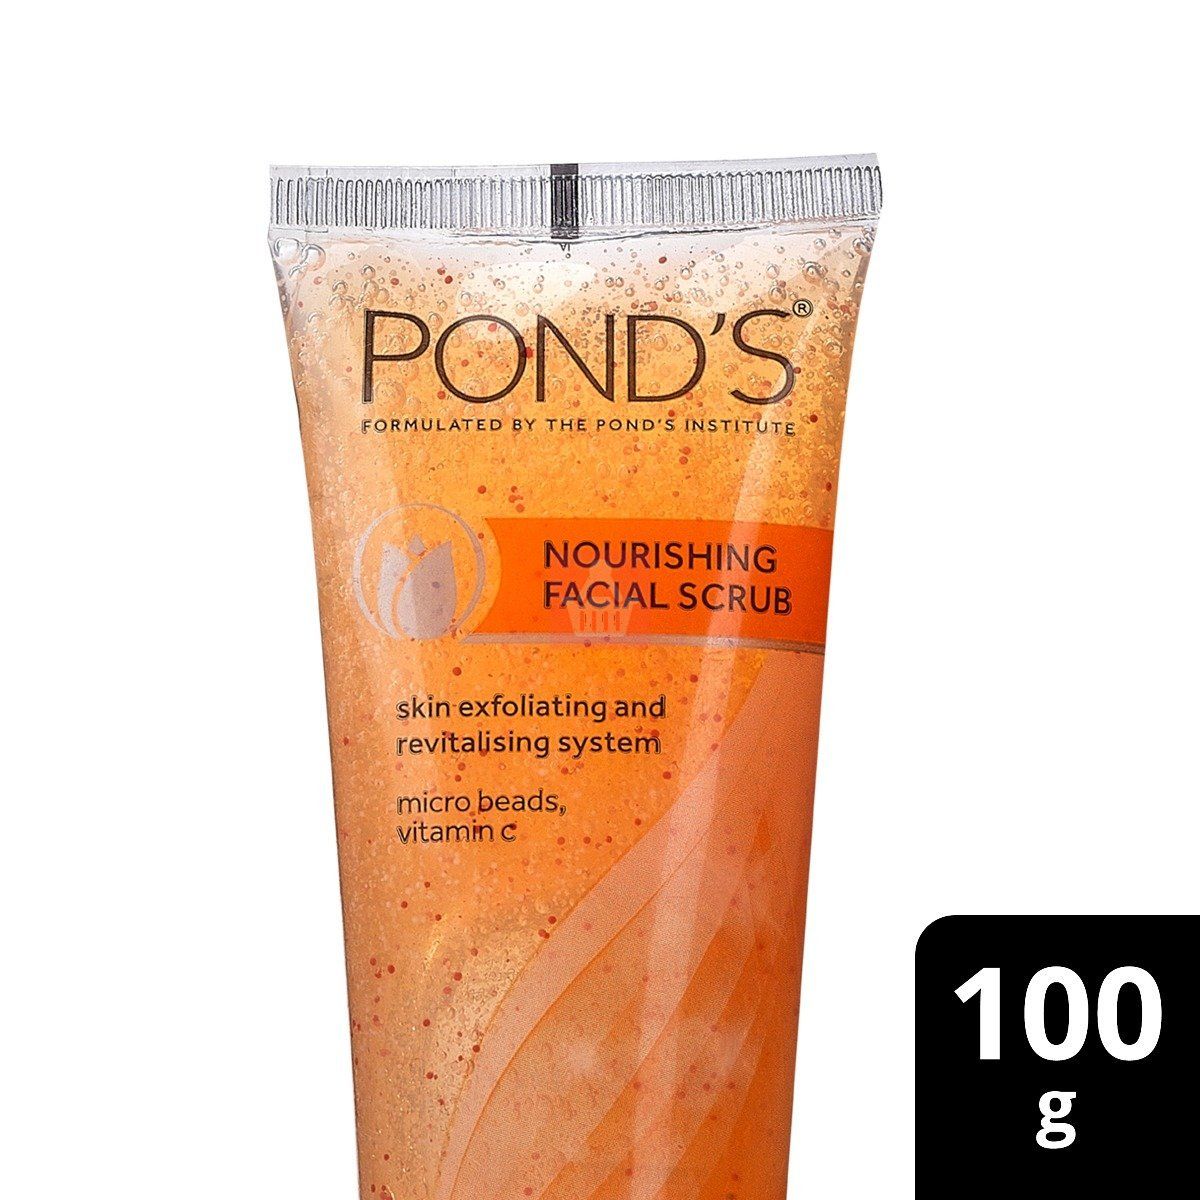 Ponds Face Wash Scrub 100g picture image